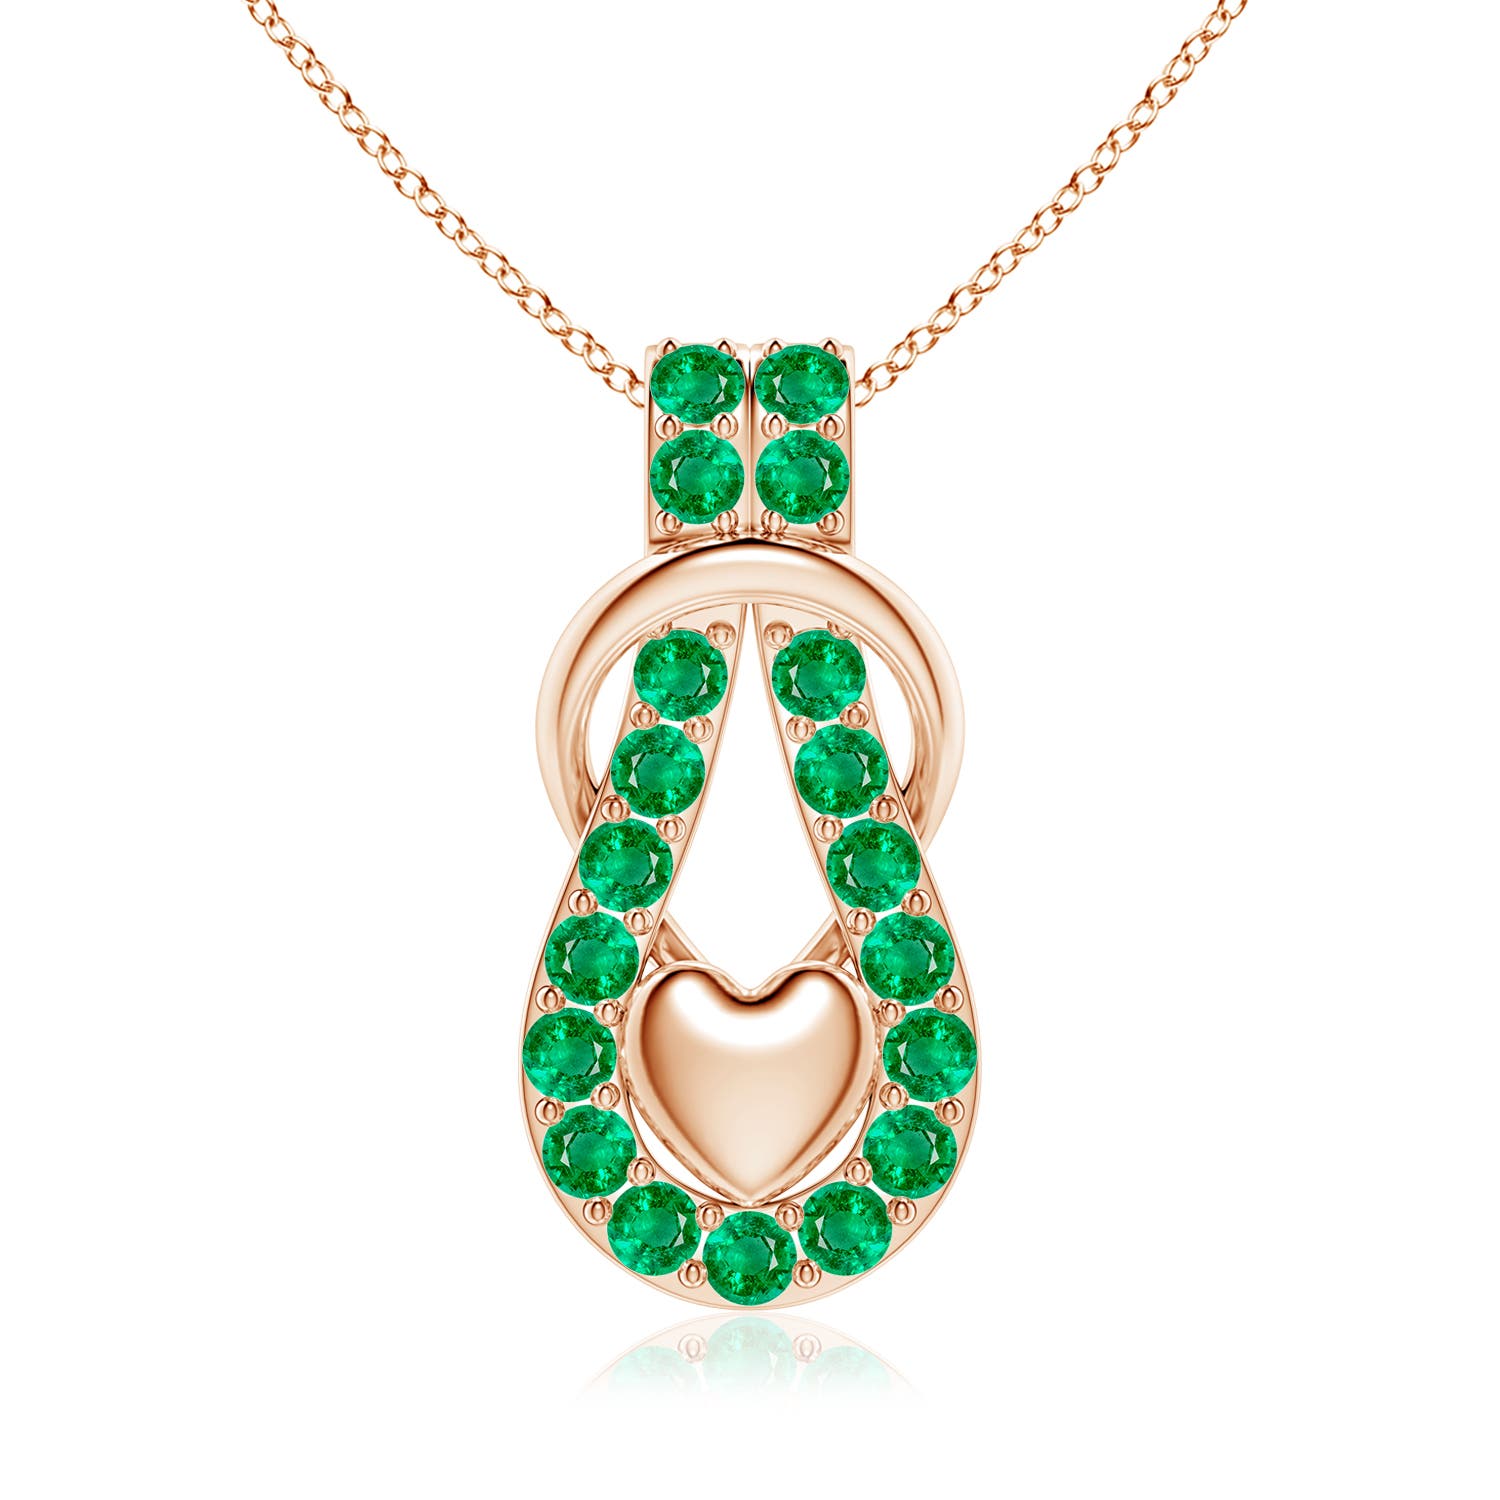 AAA - Emerald / 2.85 CT / 14 KT Rose Gold